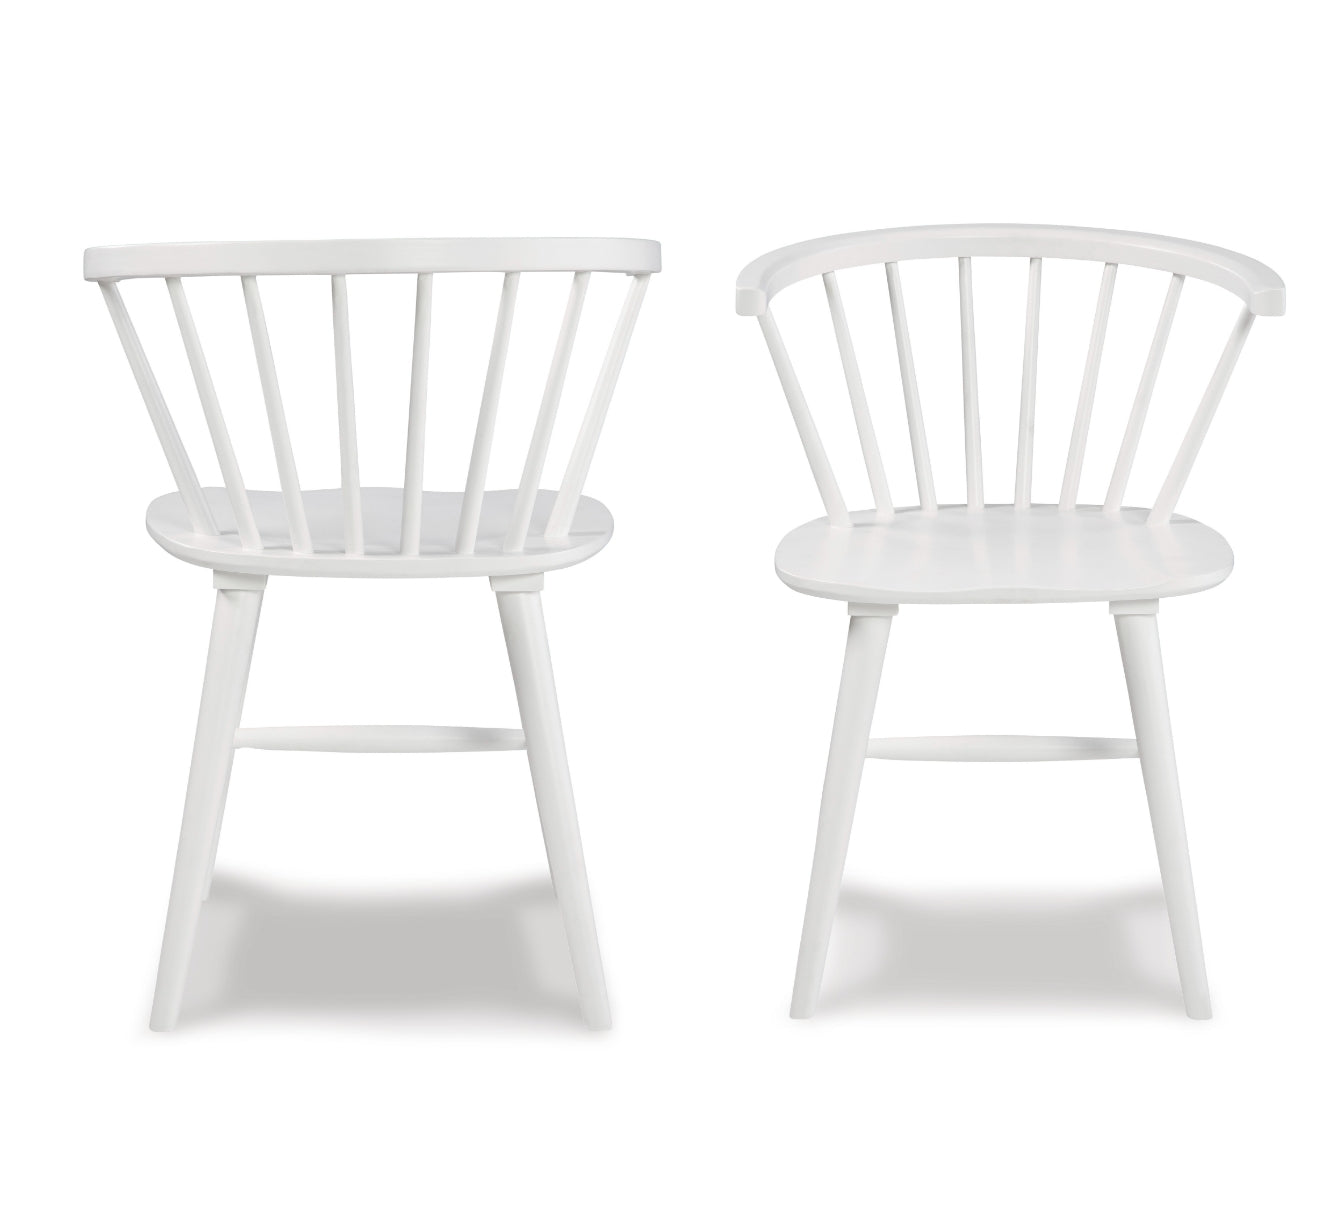 Alwynn Contemporary Wooden Spindle Back Dining Chairs, Set of 2, White